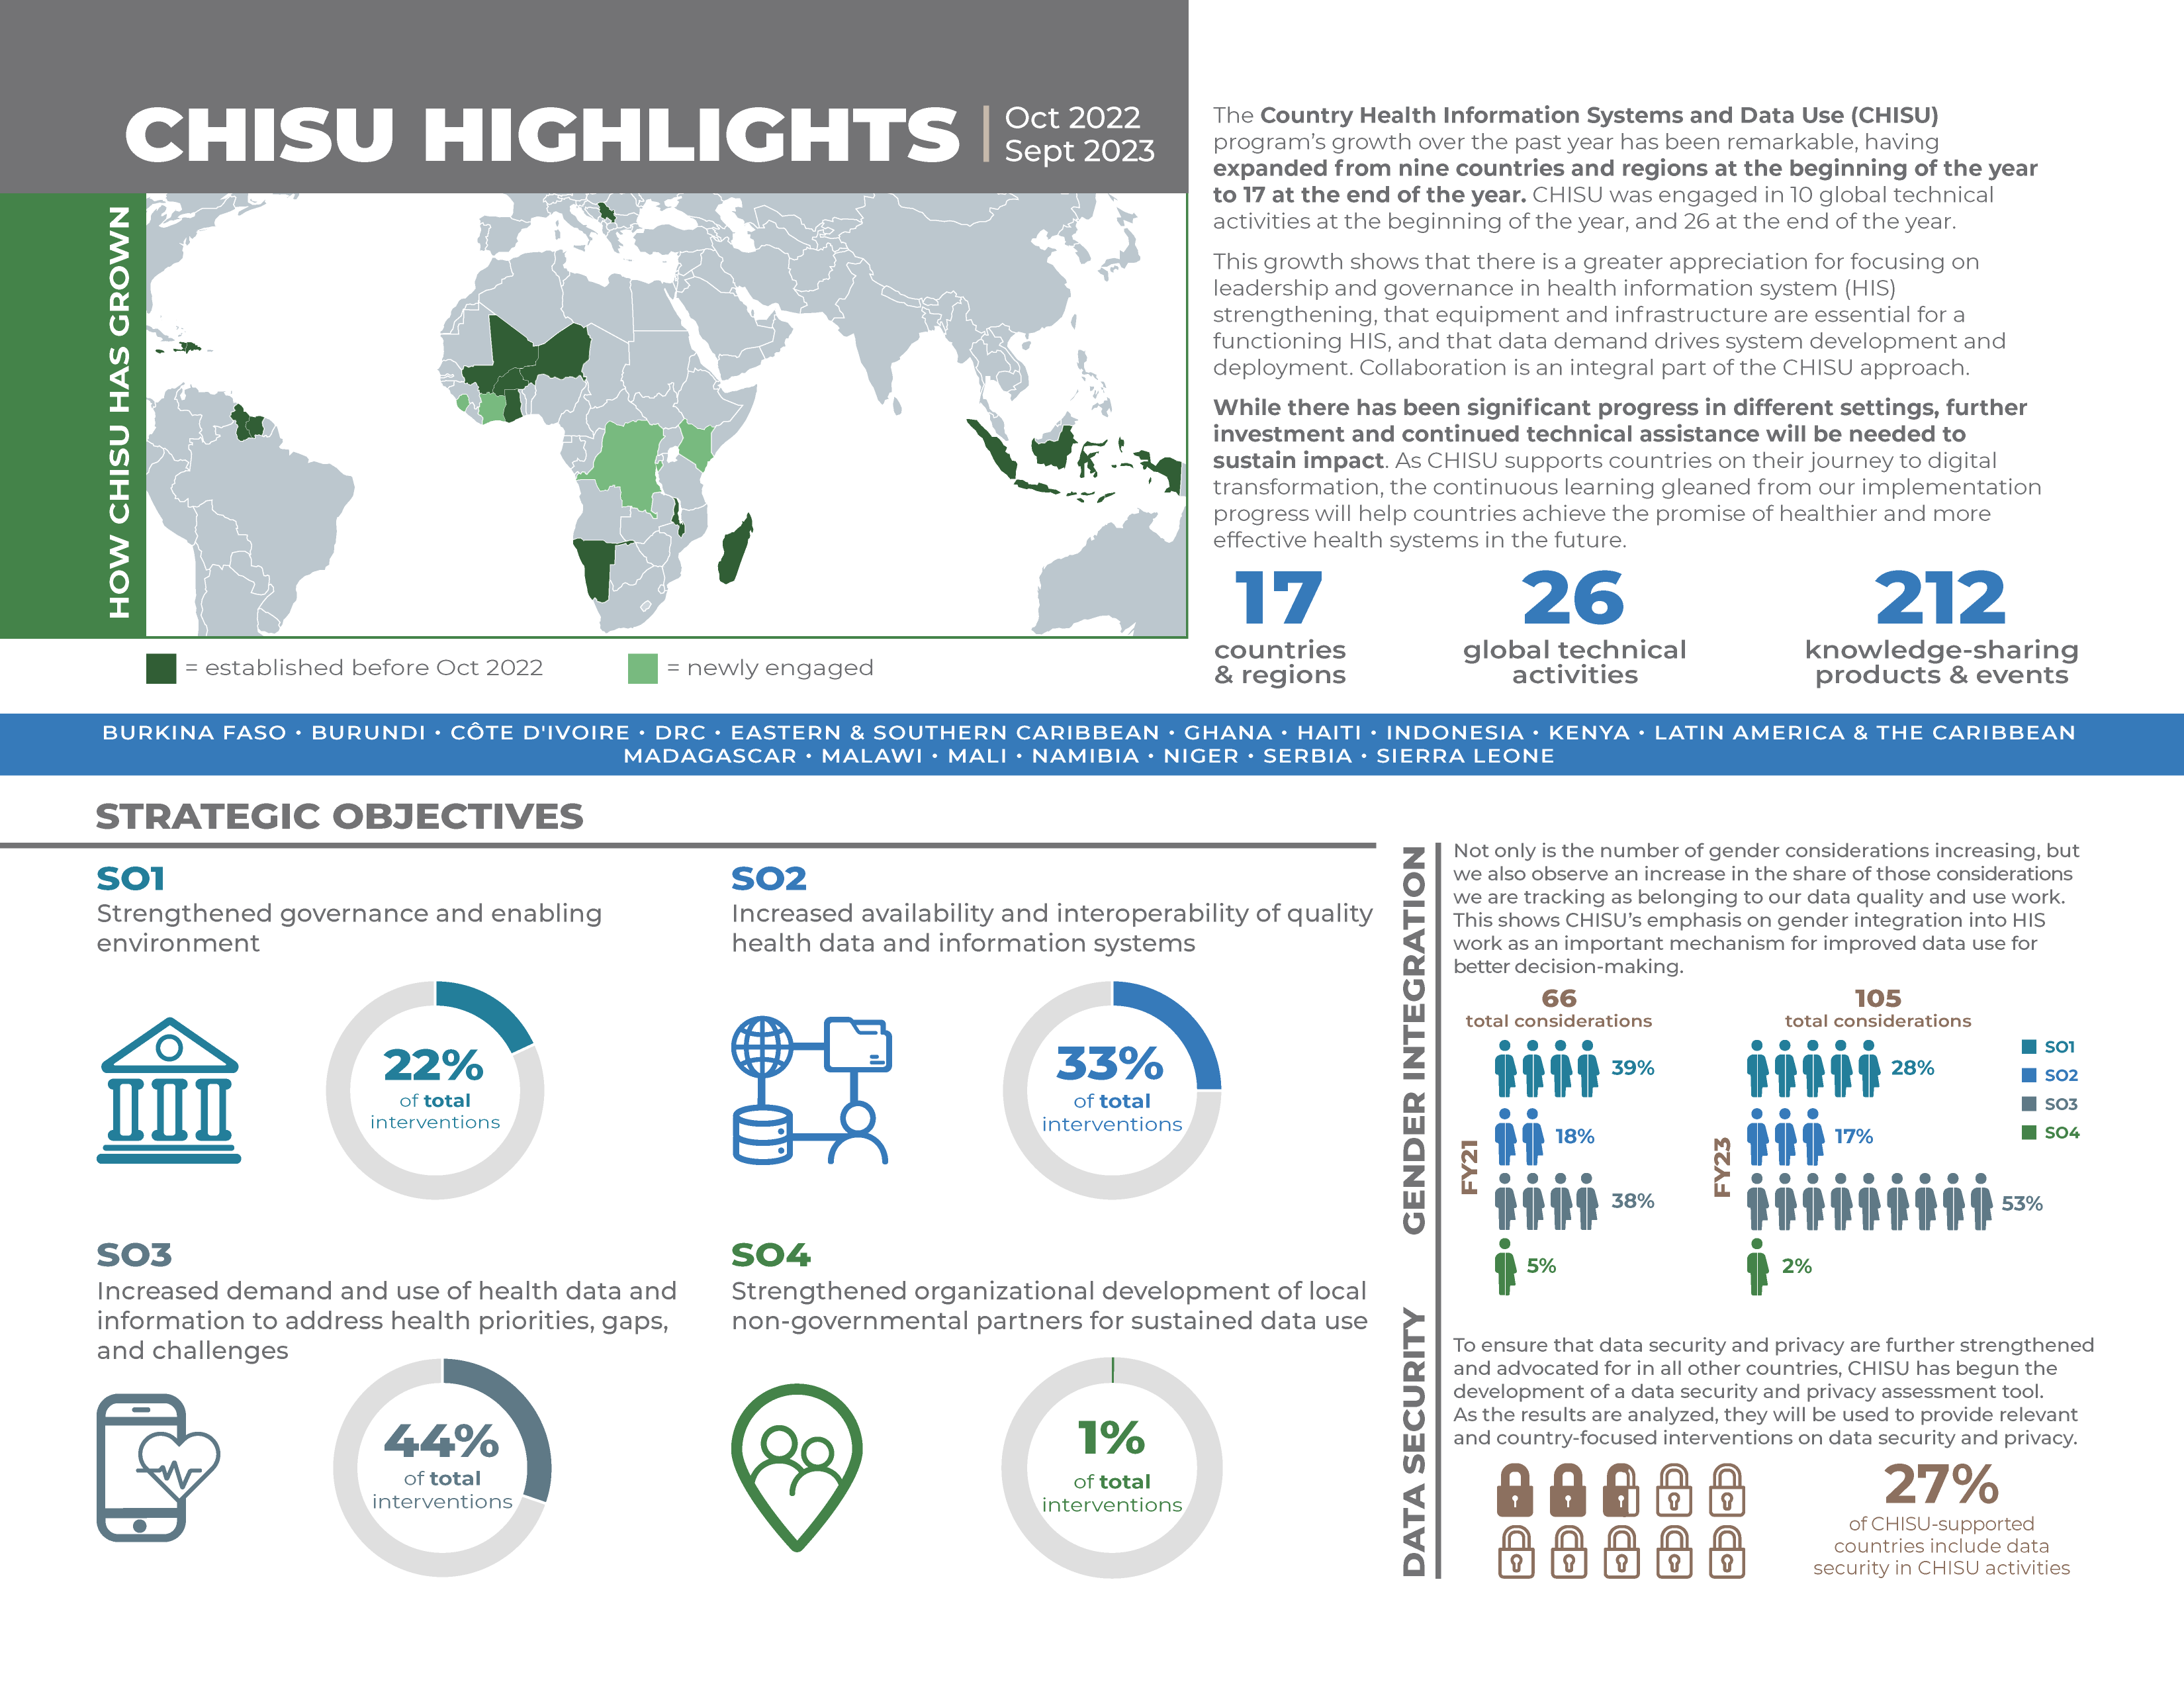 CHISU Highlights infographic from the annual report